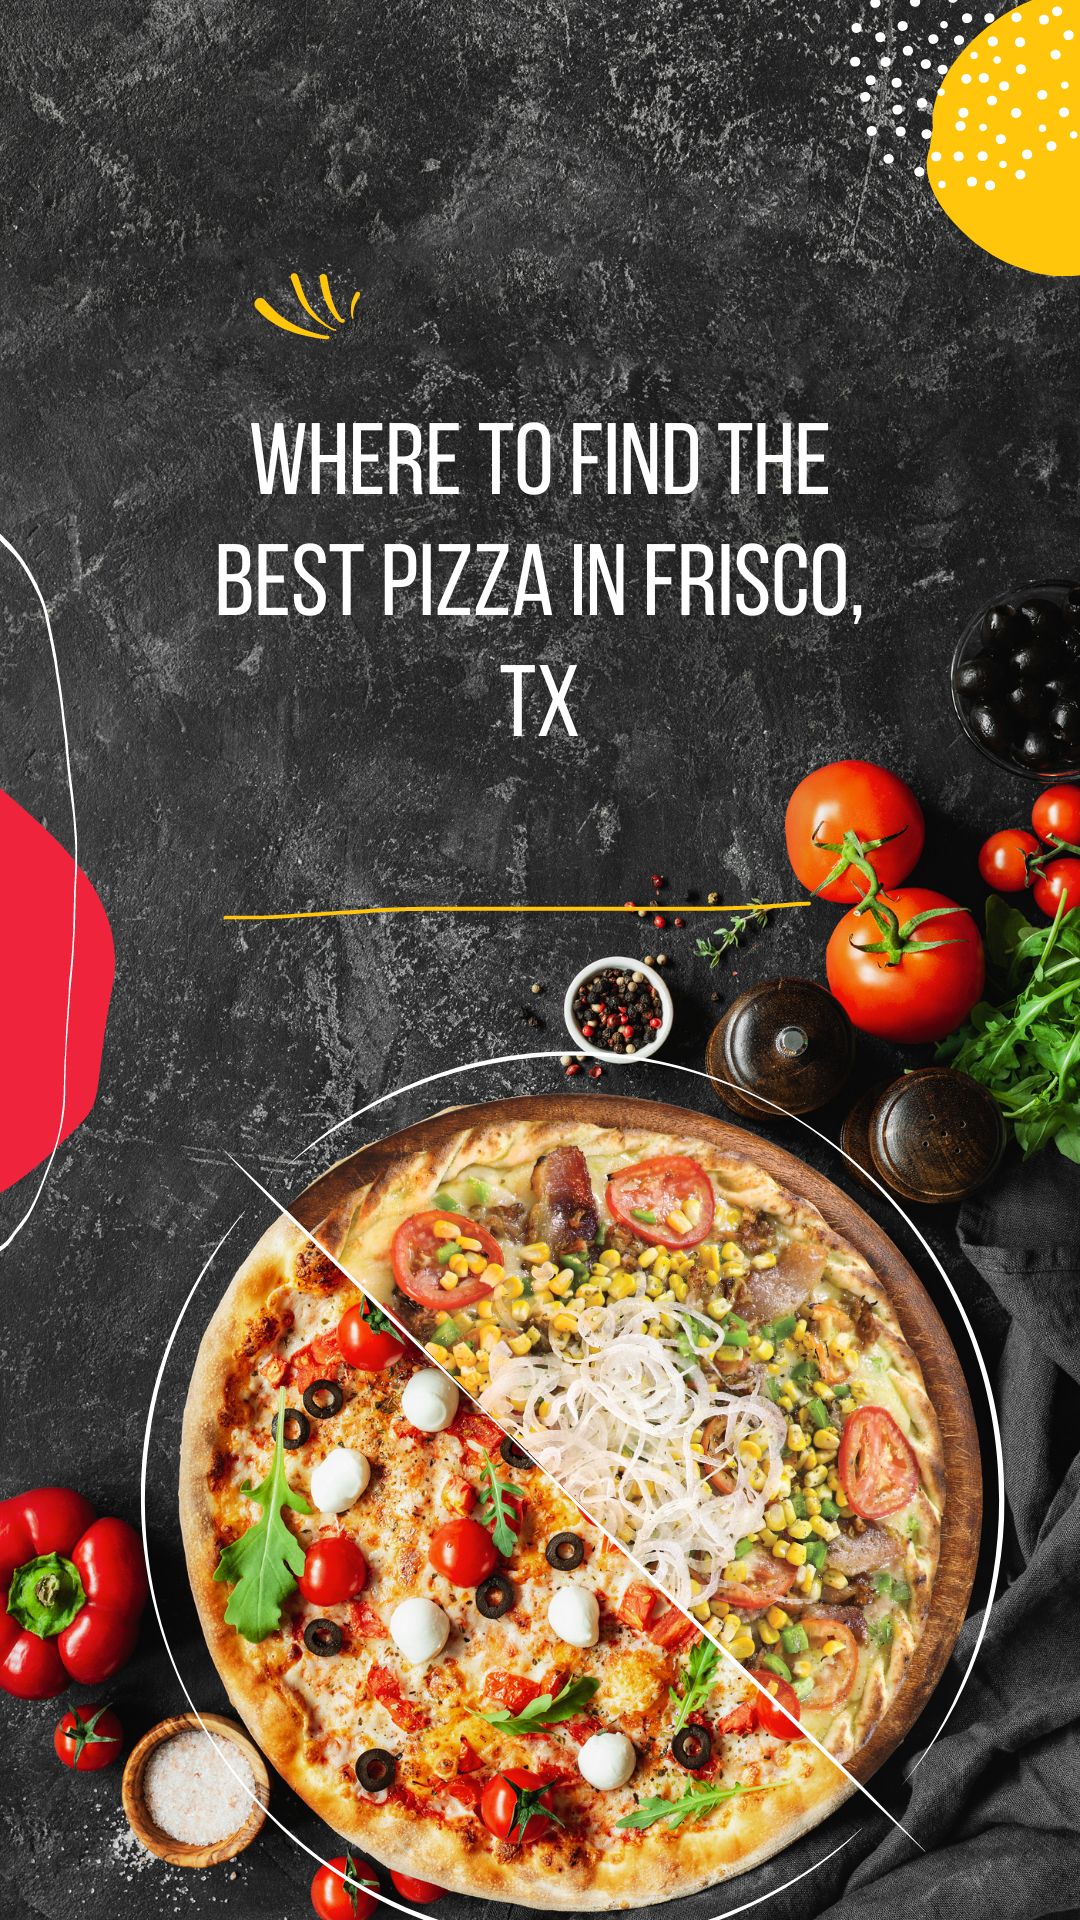 Where to Find the Best Pizza In Frisco, TX